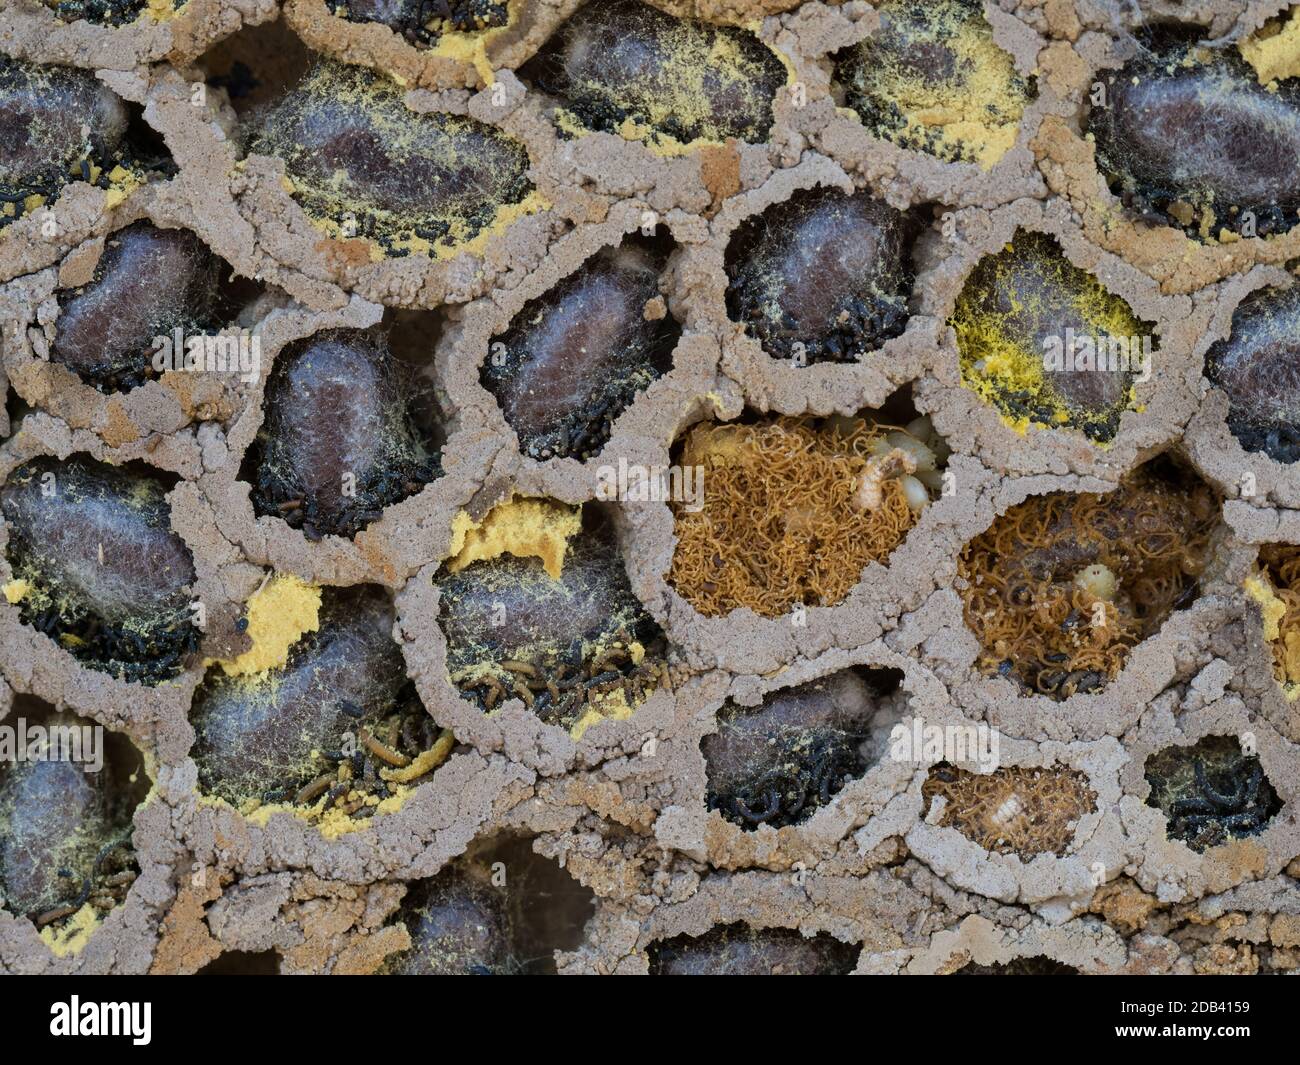 A close up macro of solitary Mason bee nest exposed revealing found cavity wall showing pupa lavae egg nectar pollen provisions mud cell compartment Stock Photo